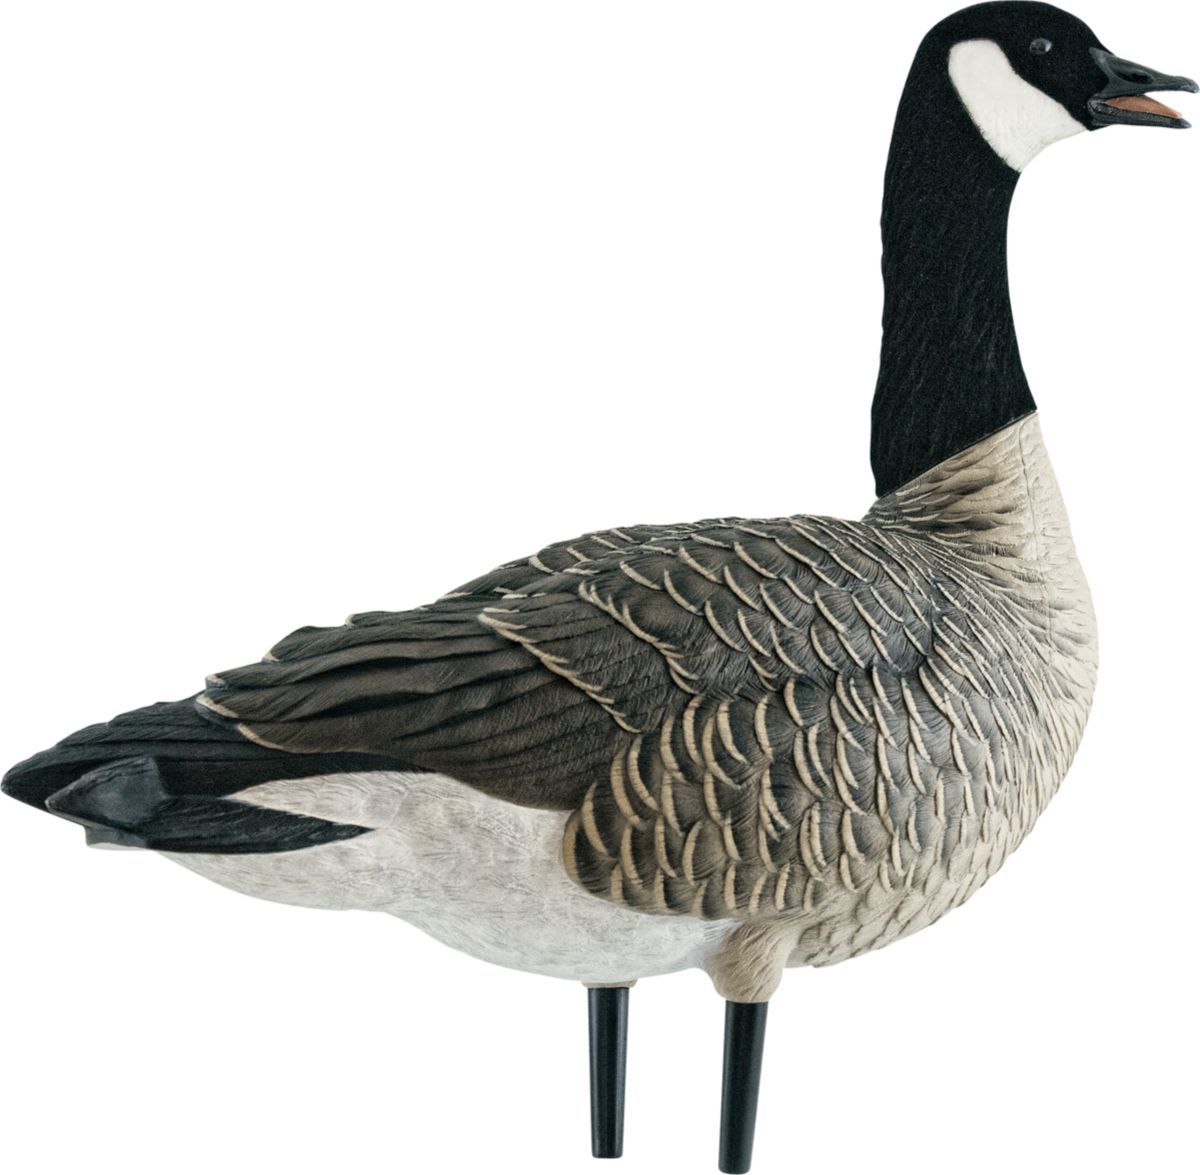 Avian-X Outfitter Lesser Canada Outfitter Goose Decoy Pack with Twelve-Slot Decoy Bag